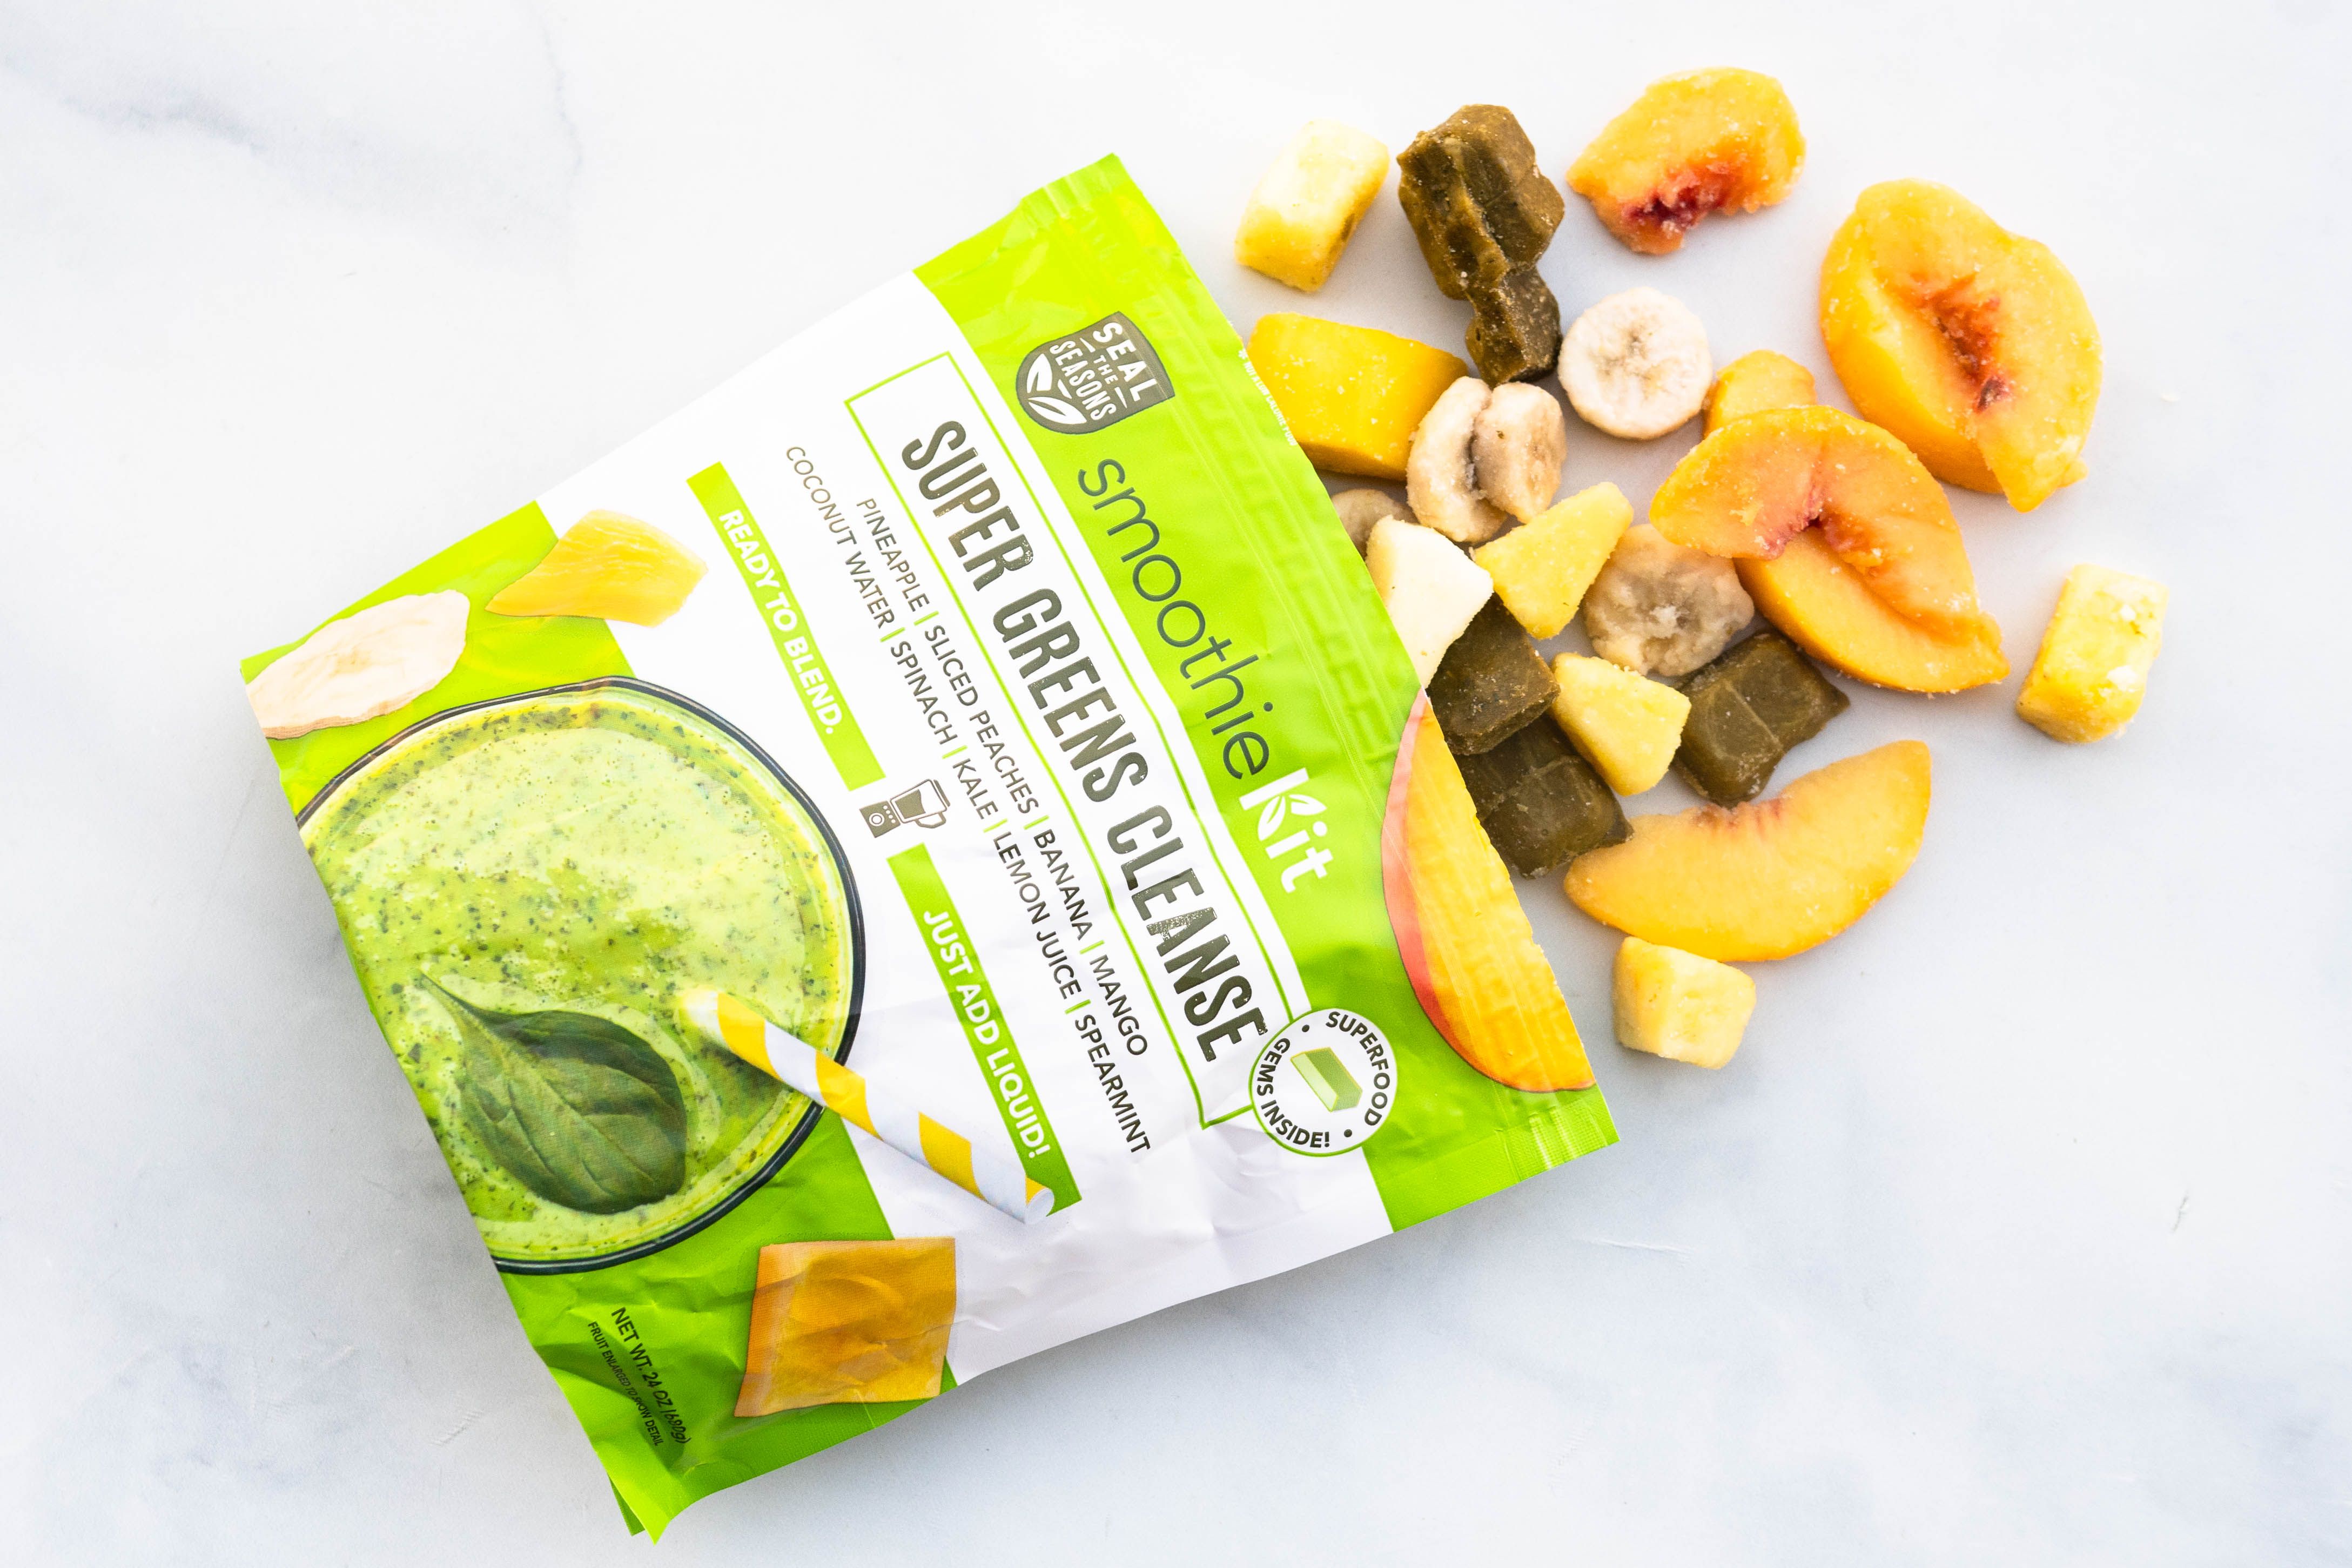 Buy Super Greens Cleanse Smoothie Mix For Delivery Near You